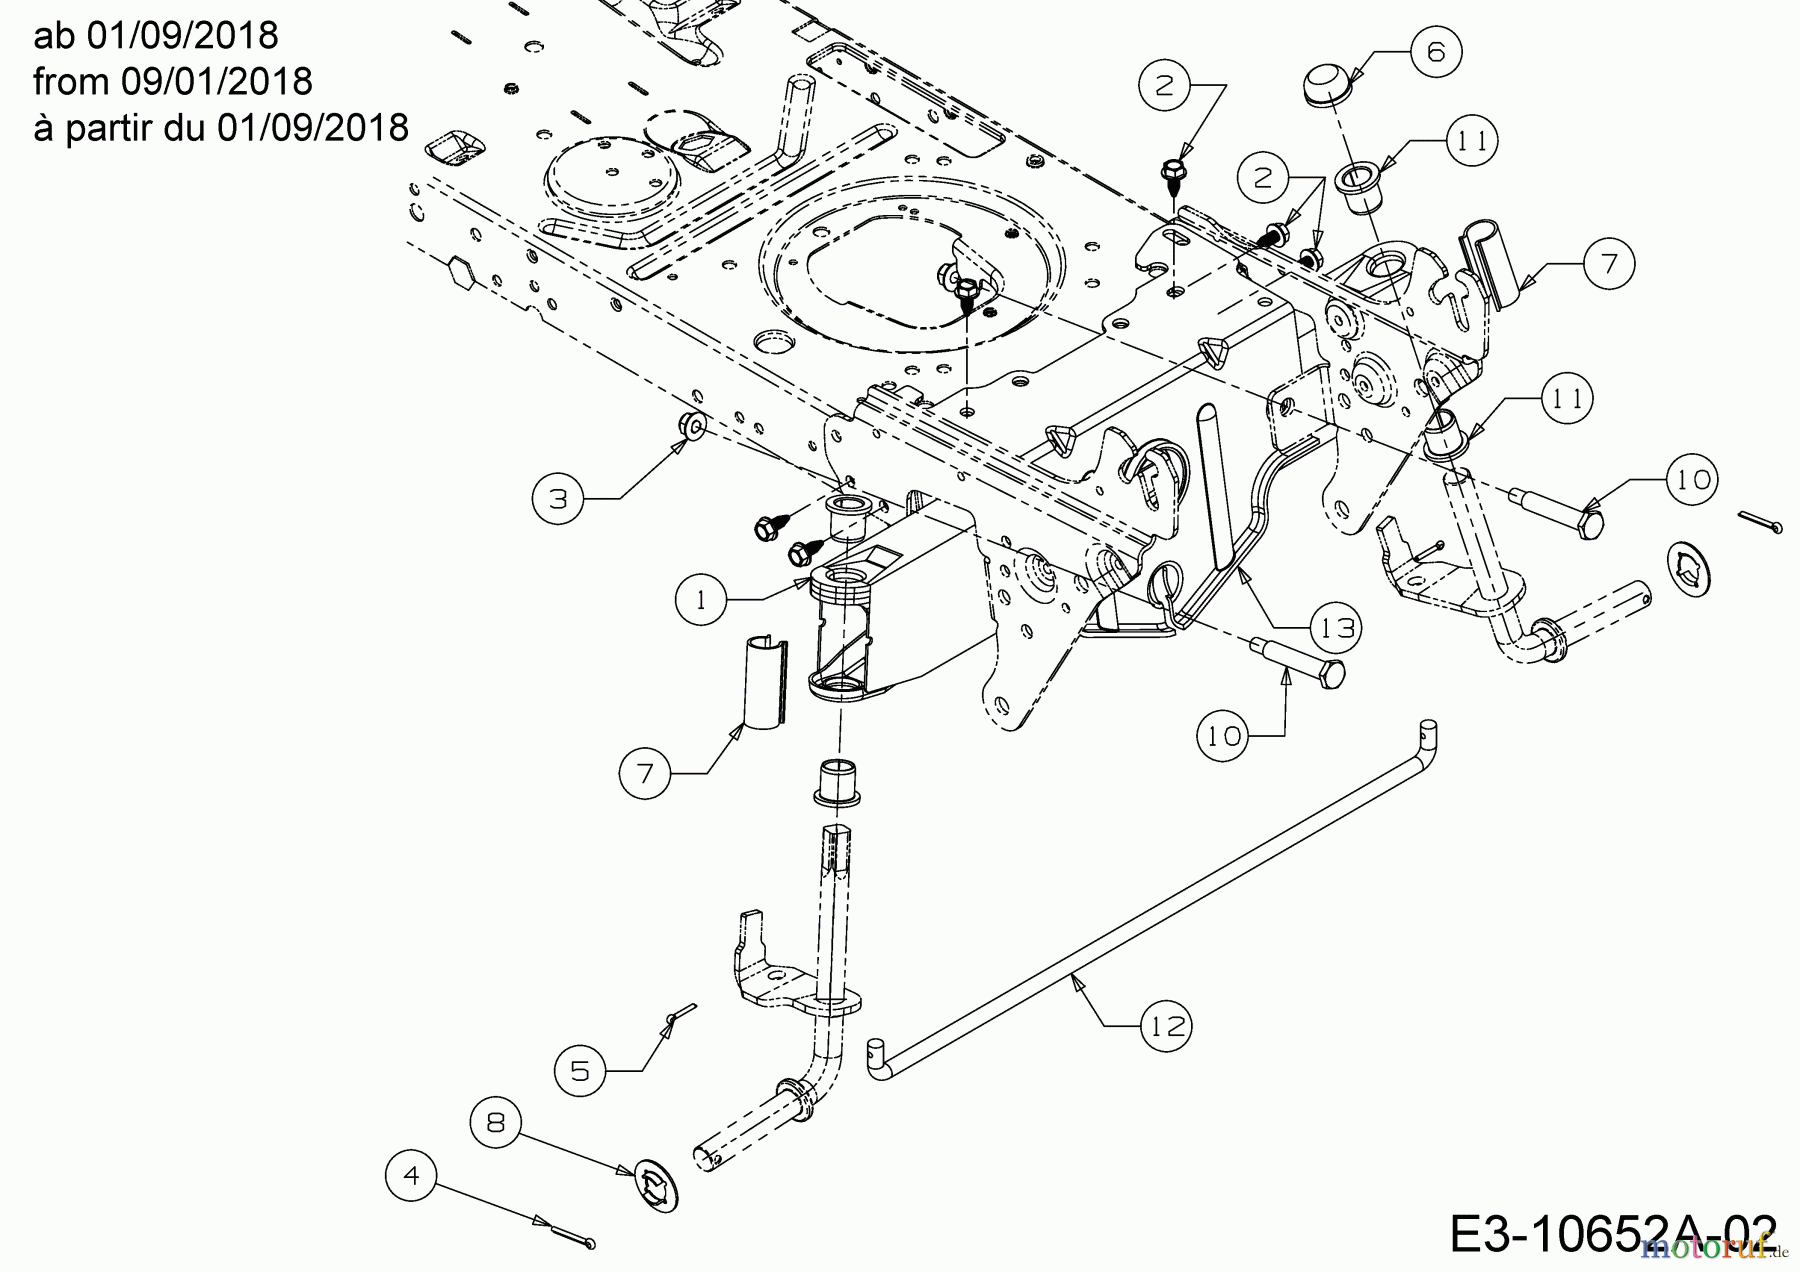  Wolf-Garten Lawn tractors E 13/96 H 13H2795F650  (2019) Front axle from 09/01/2018